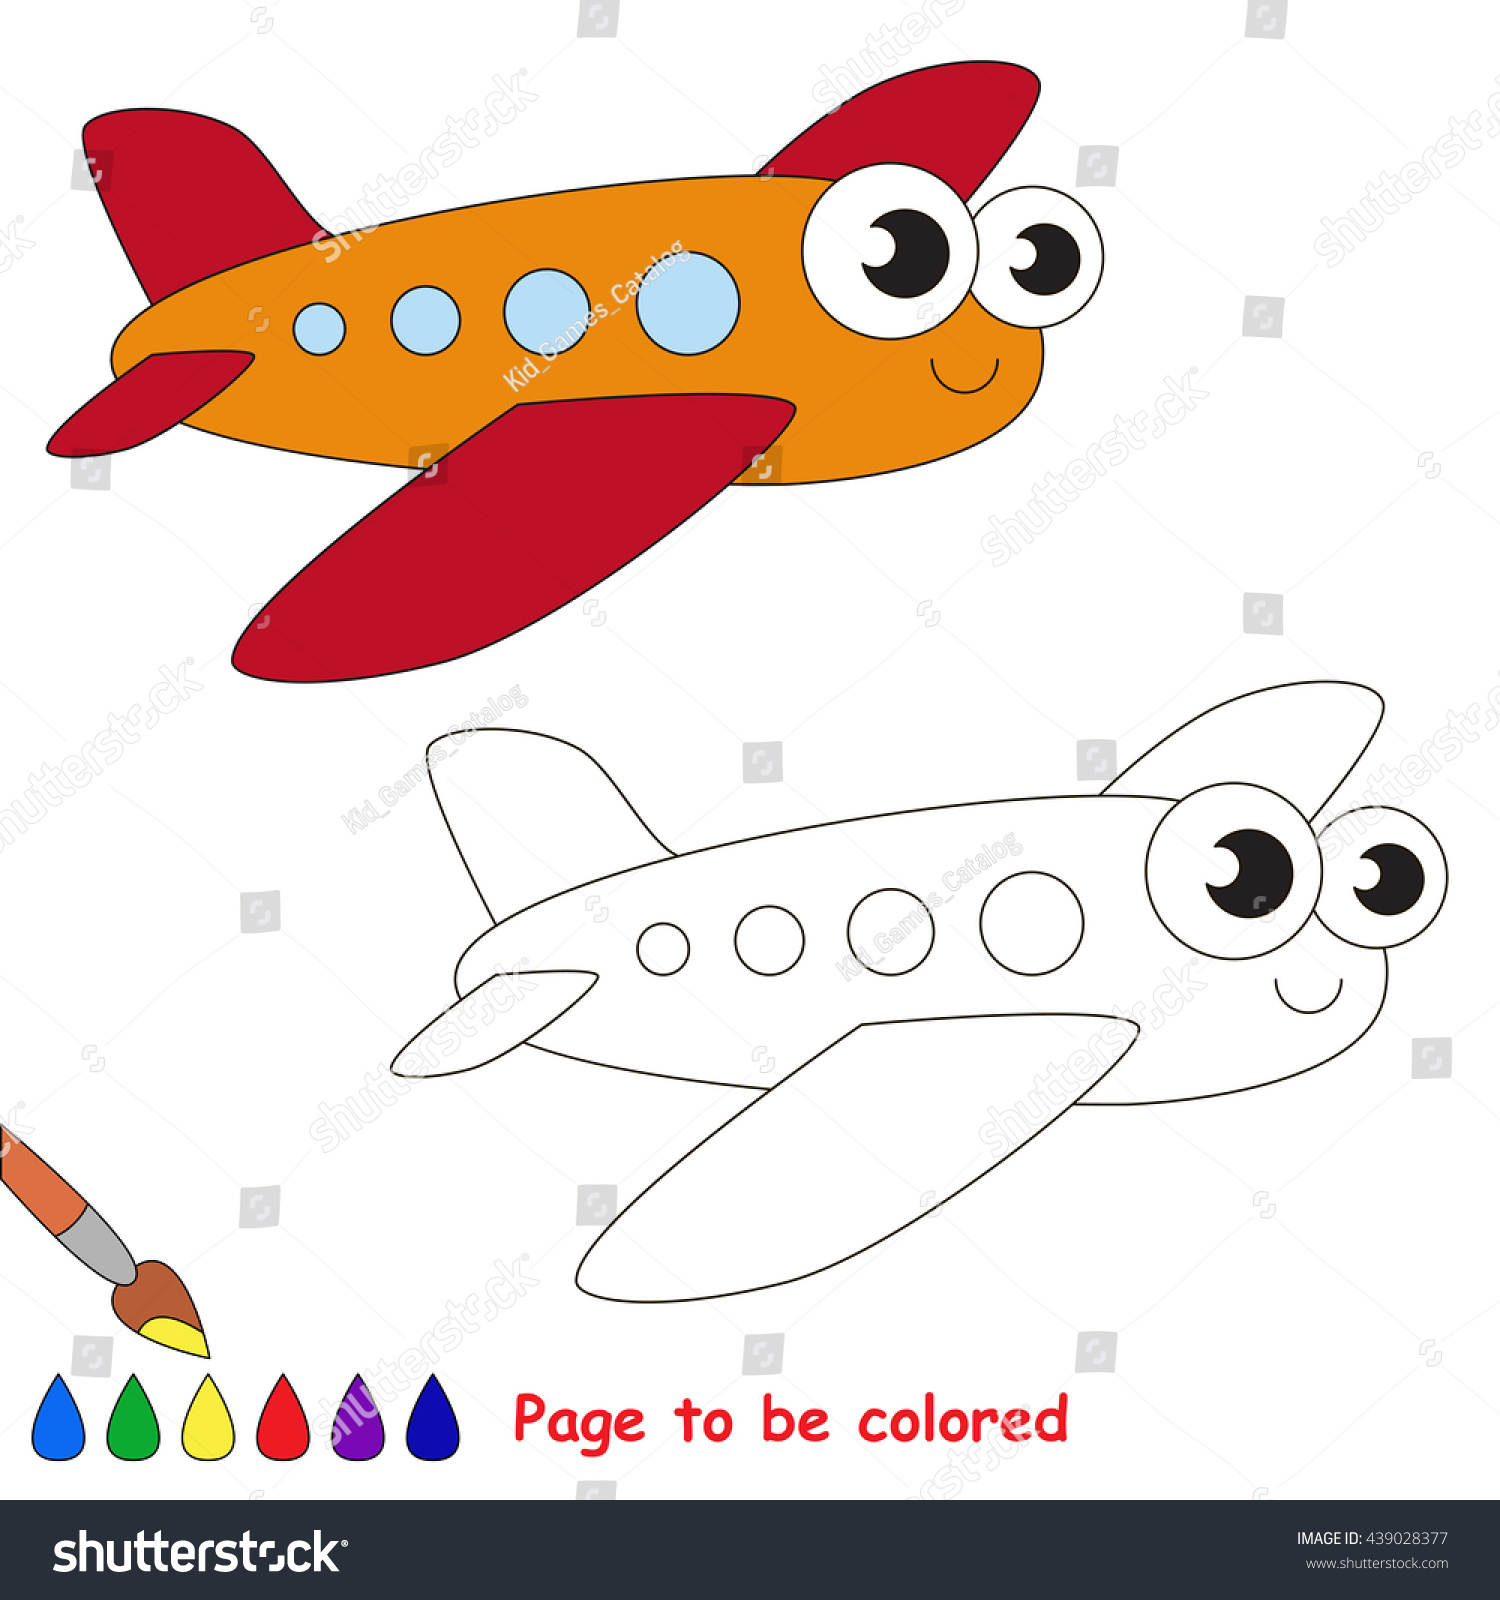 Red Airplane Be Colored Coloring Book Stock Vector Royalty Free ...